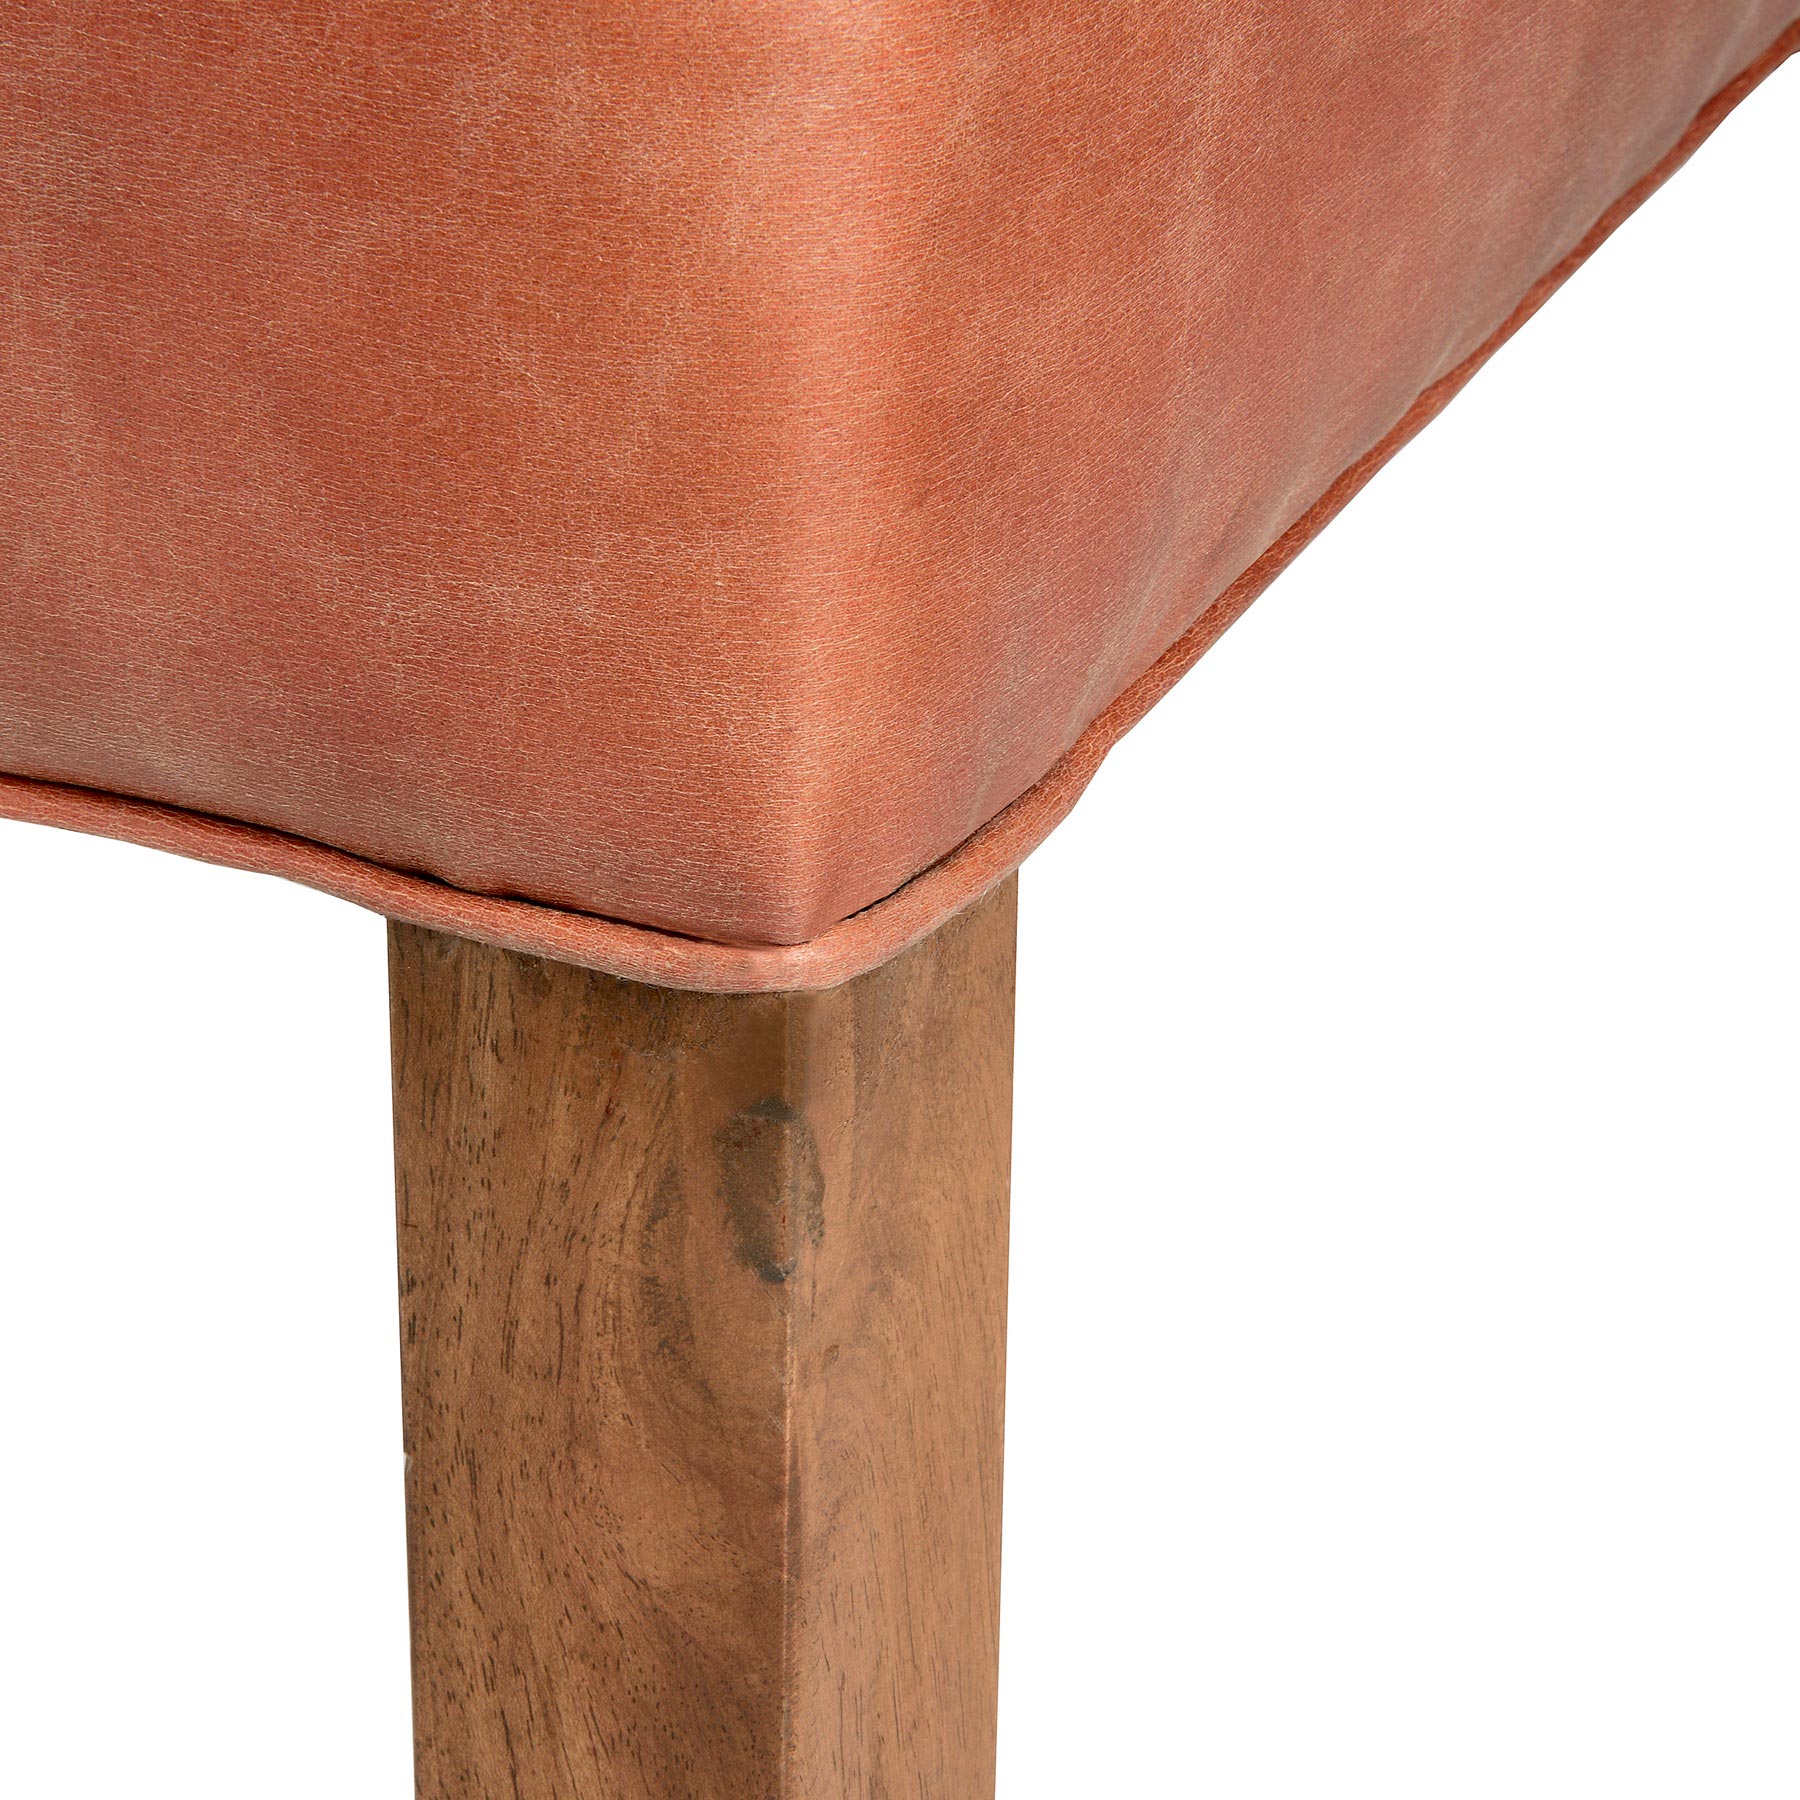 Tan Faux Leather Dining Chair - Image 4